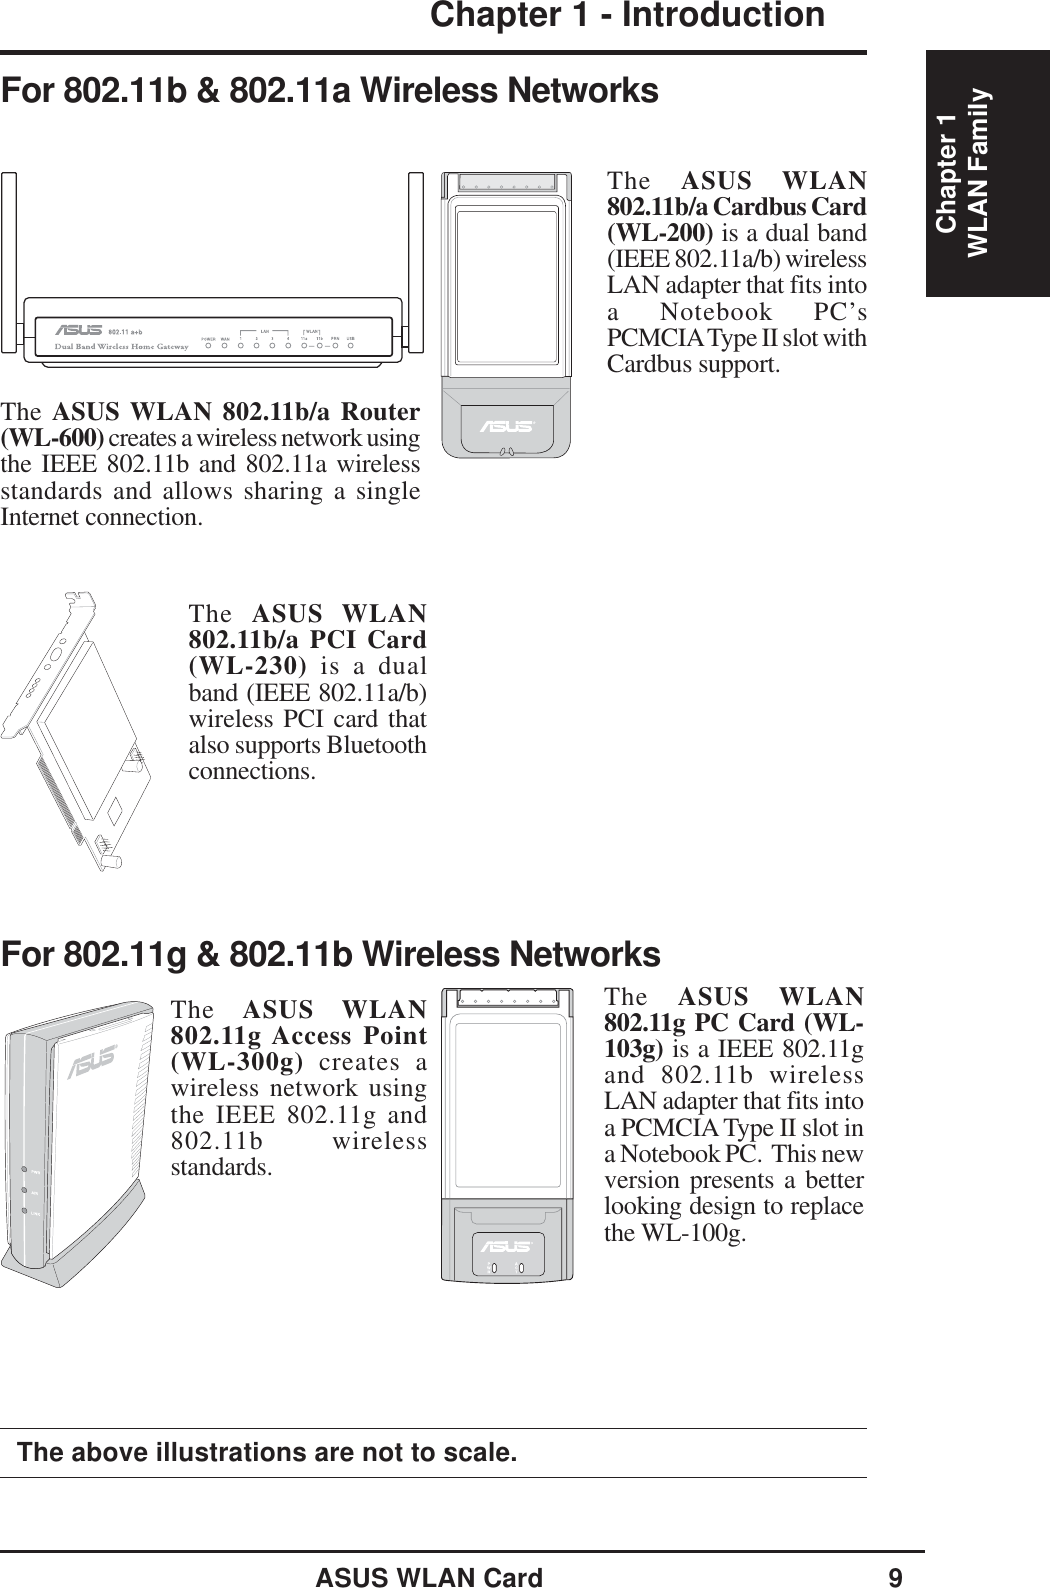 ASUS WLAN Card 9Chapter 1 - IntroductionChapter 1The above illustrations are not to scale.WLAN FamilyThe ASUS WLAN 802.11b/a Router(WL-600) creates a wireless network usingthe IEEE 802.11b and 802.11a wirelessstandards and allows sharing a singleInternet connection.The  ASUS WLAN802.11b/a Cardbus Card(WL-200) is a dual band(IEEE 802.11a/b) wirelessLAN adapter that fits intoa Notebook PC’sPCMCIA Type II slot withCardbus support.The  ASUS WLAN802.11b/a PCI Card(WL-230) is a dualband (IEEE 802.11a/b)wireless PCI card thatalso supports Bluetoothconnections.For 802.11b &amp; 802.11a Wireless NetworksThe  ASUS WLAN802.11g Access Point(WL-300g) creates awireless network usingthe IEEE 802.11g and802.11b wirelessstandards.For 802.11g &amp; 802.11b Wireless NetworksThe  ASUS WLAN802.11g PC Card (WL-103g) is a IEEE 802.11gand 802.11b wirelessLAN adapter that fits intoa PCMCIA Type II slot ina Notebook PC.  This newversion presents a betterlooking design to replacethe WL-100g.